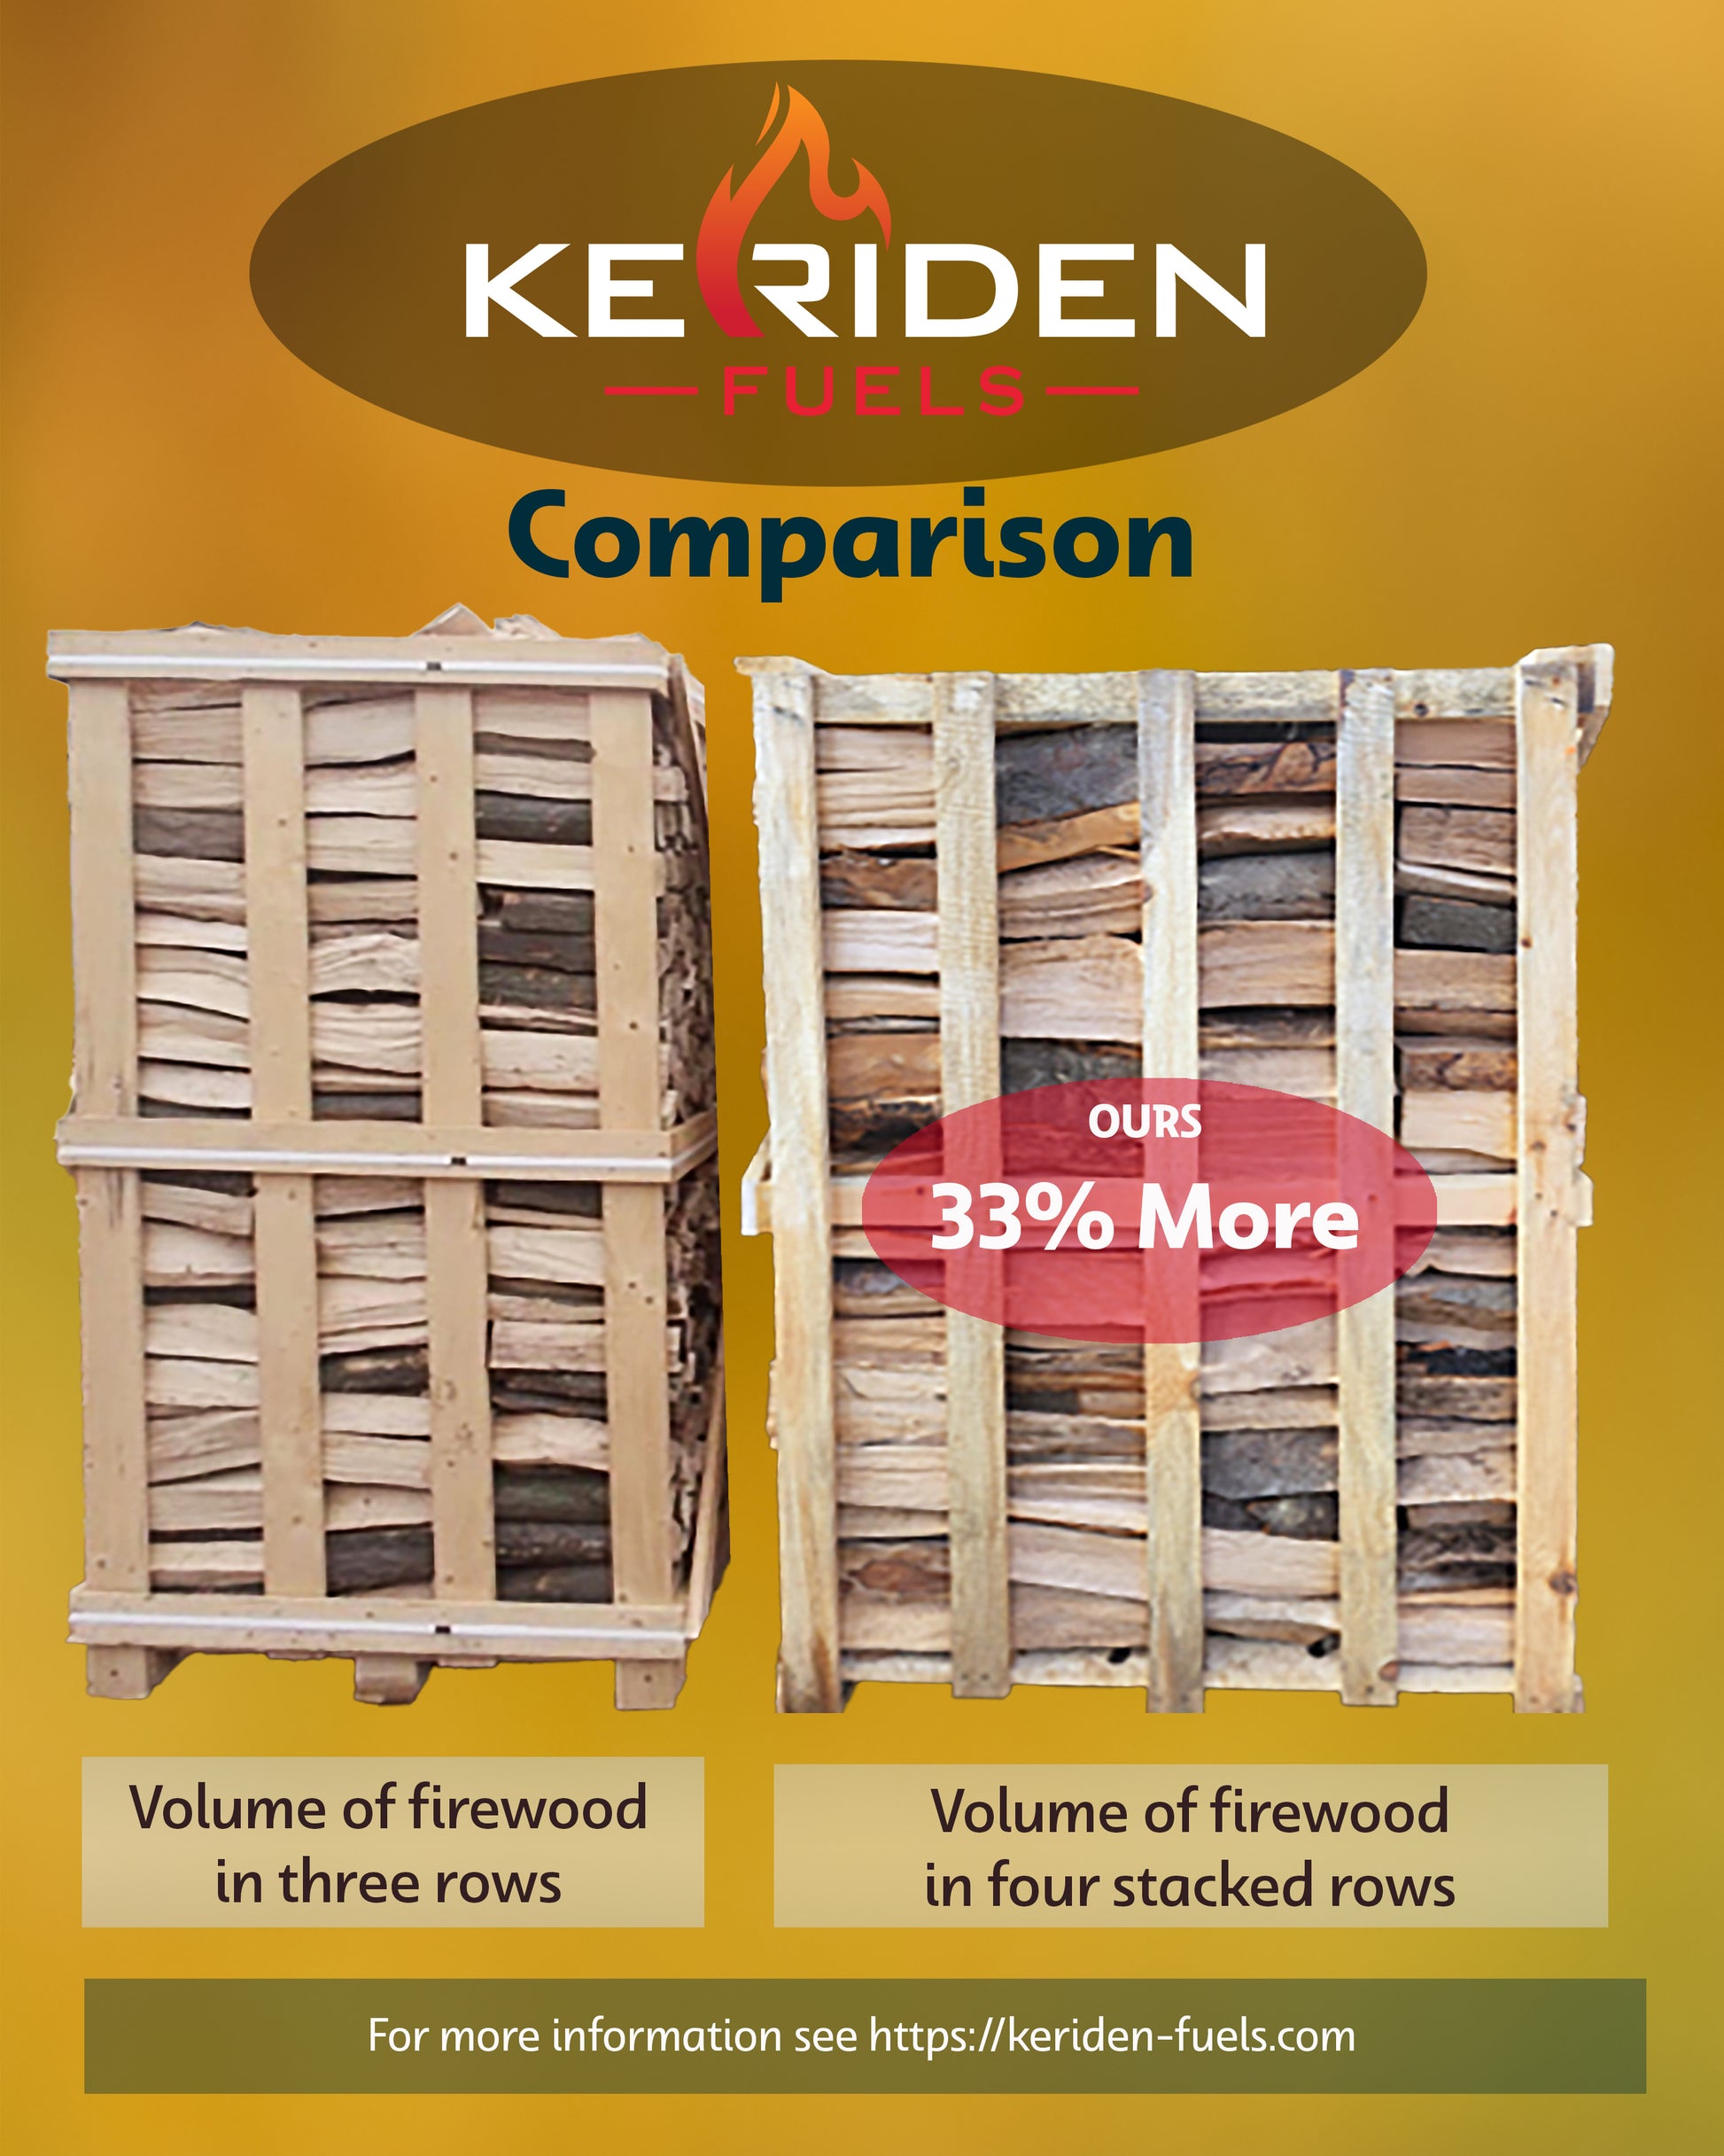 Comparison of the amount of firewood we supply in a crate